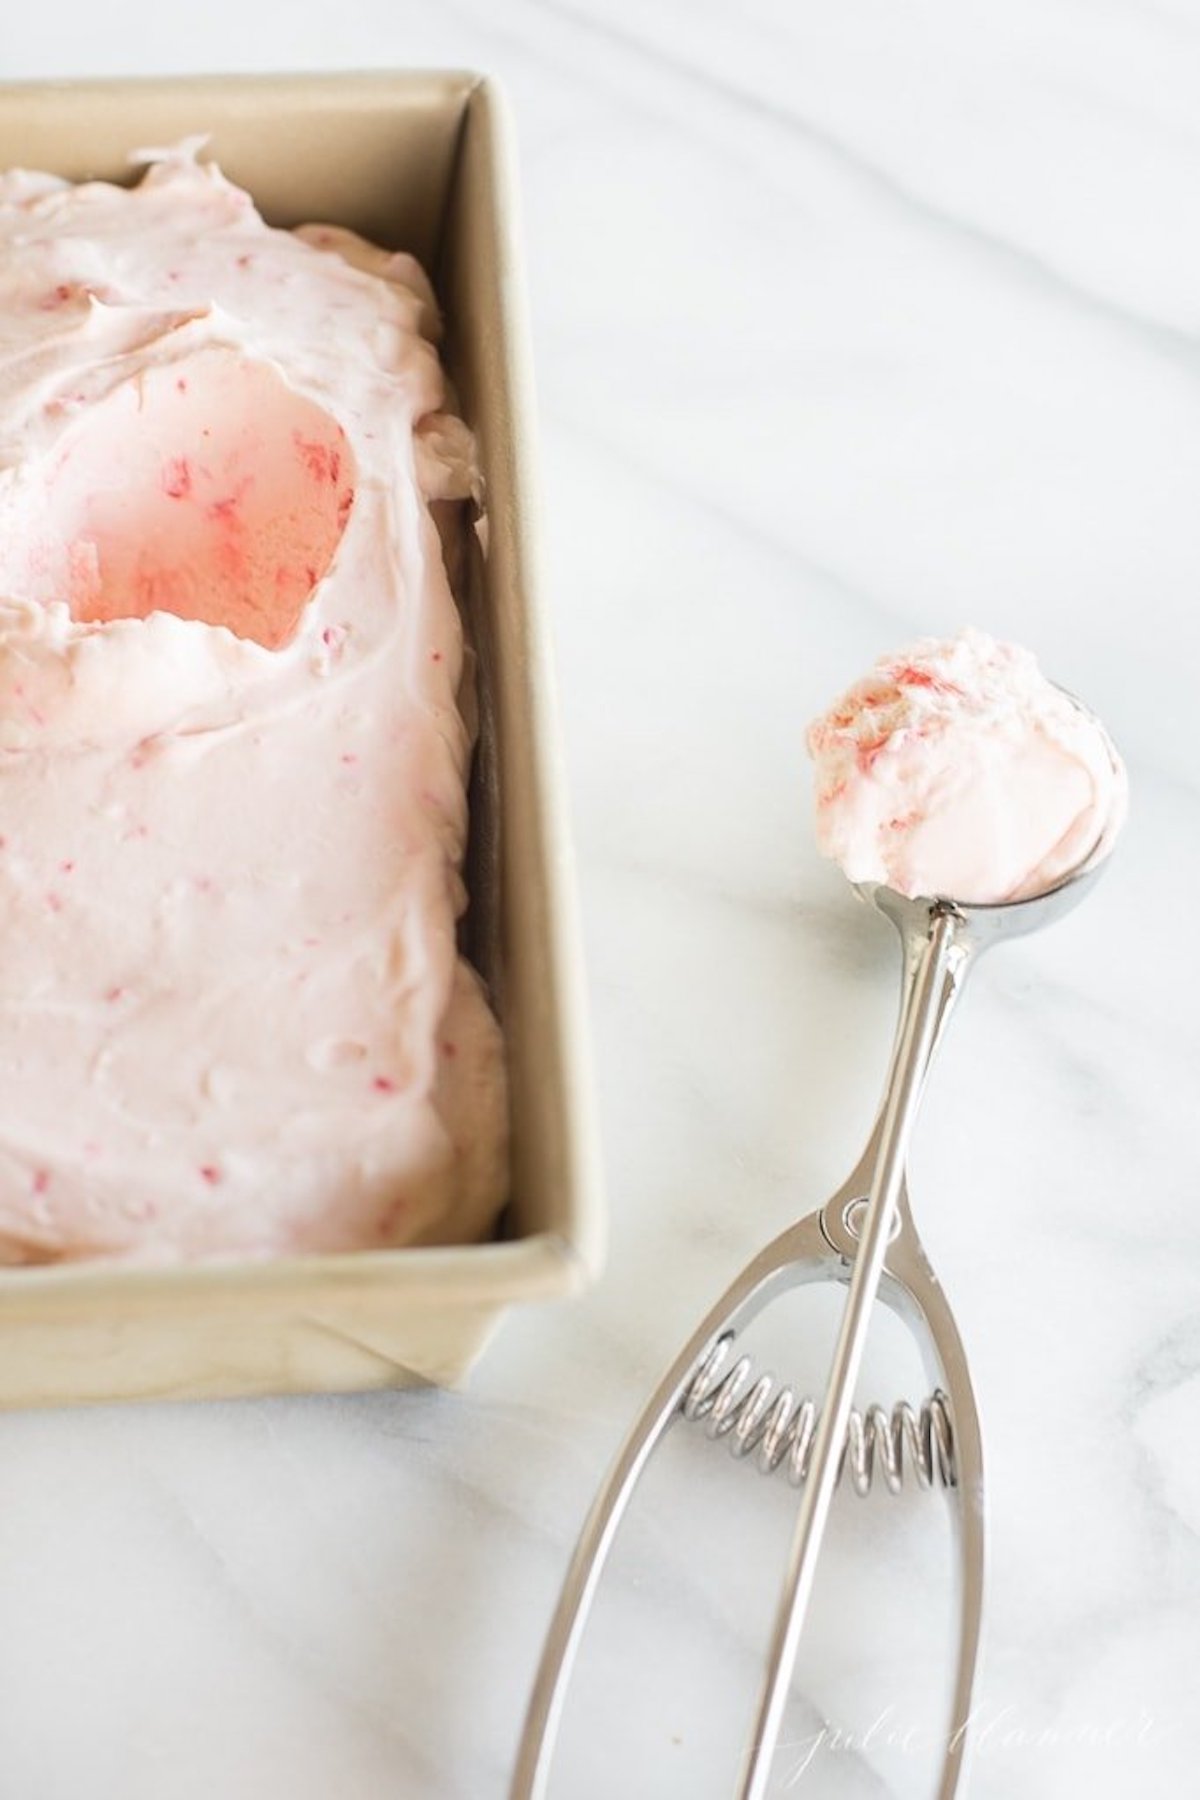 Peppermint ice cream in a pan with a spatula.